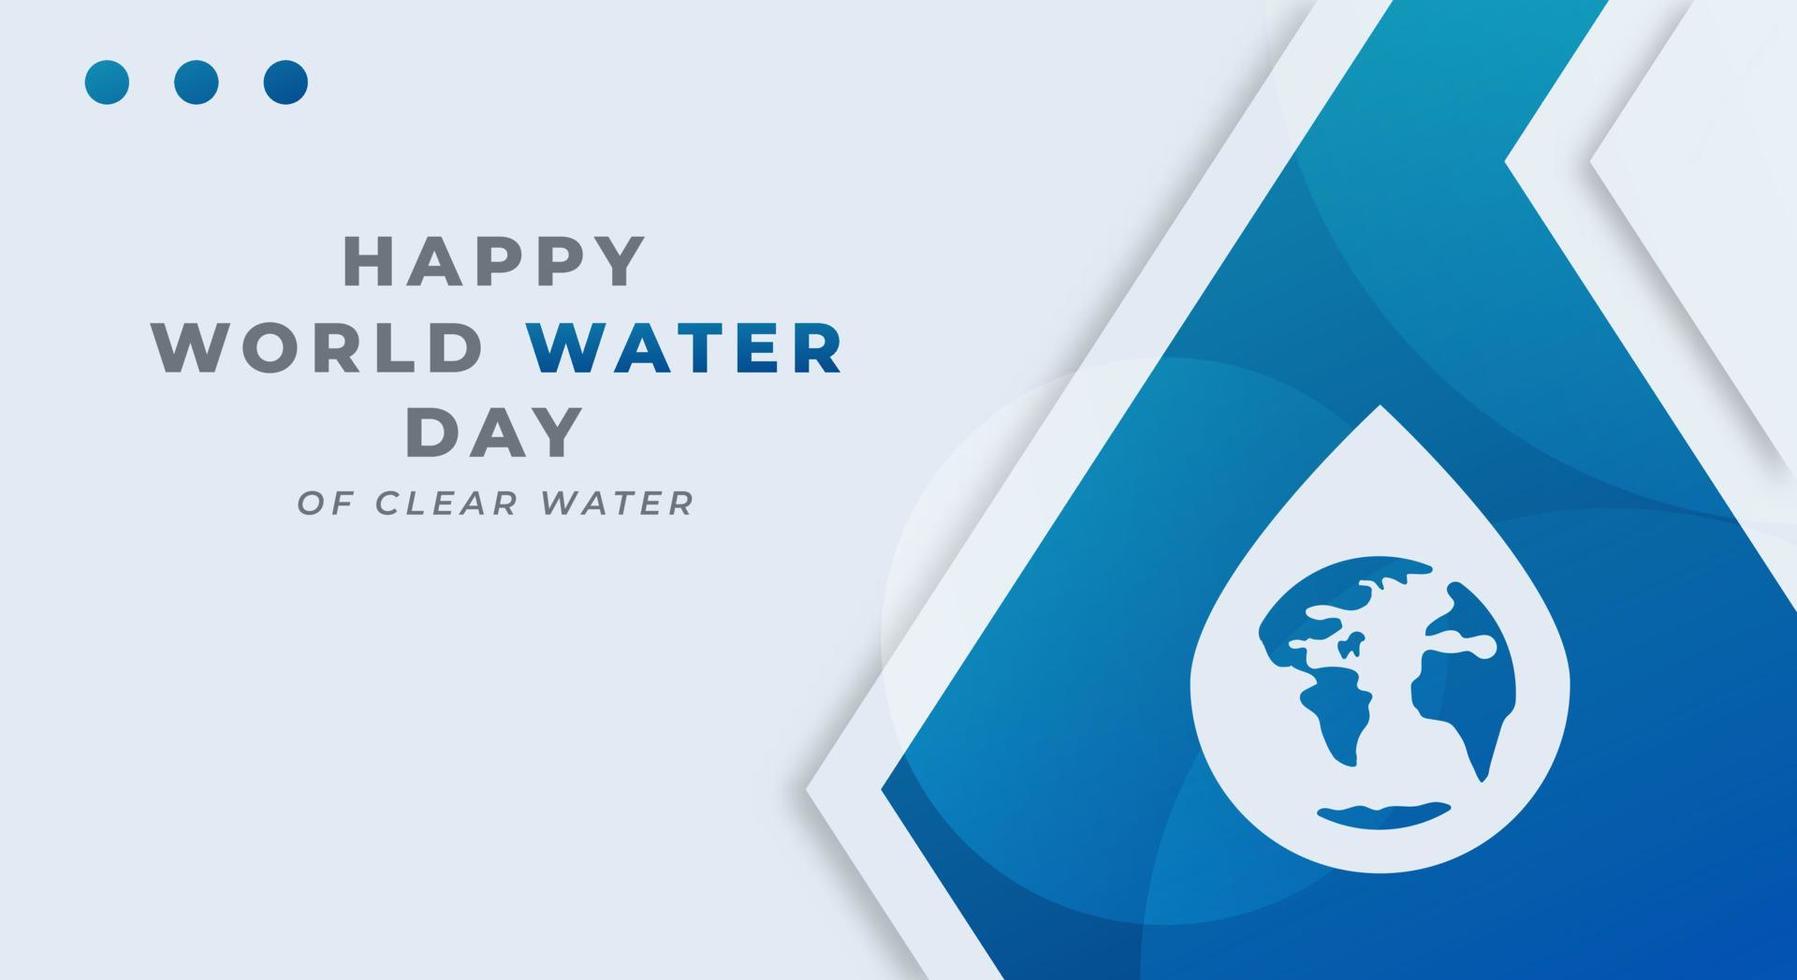 Happy World Water Day Celebration Vector Design Illustration for Background, Poster, Banner, Advertising, Greeting Card